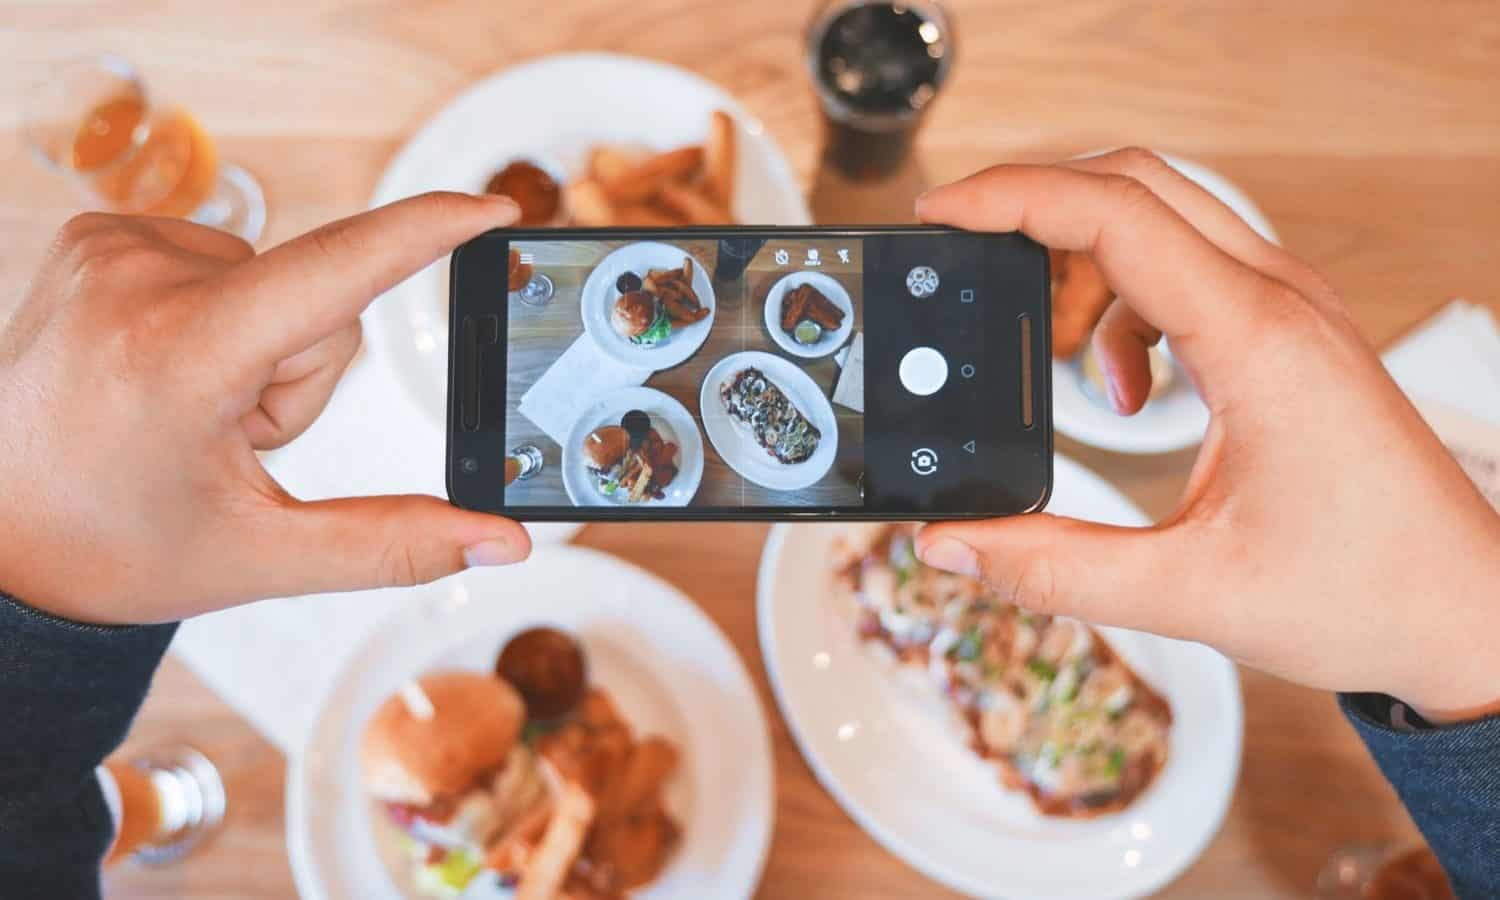 Can AI save our food system? A growing number of companies are leveraging AI technology to help eaters with these day-to-day food choices.